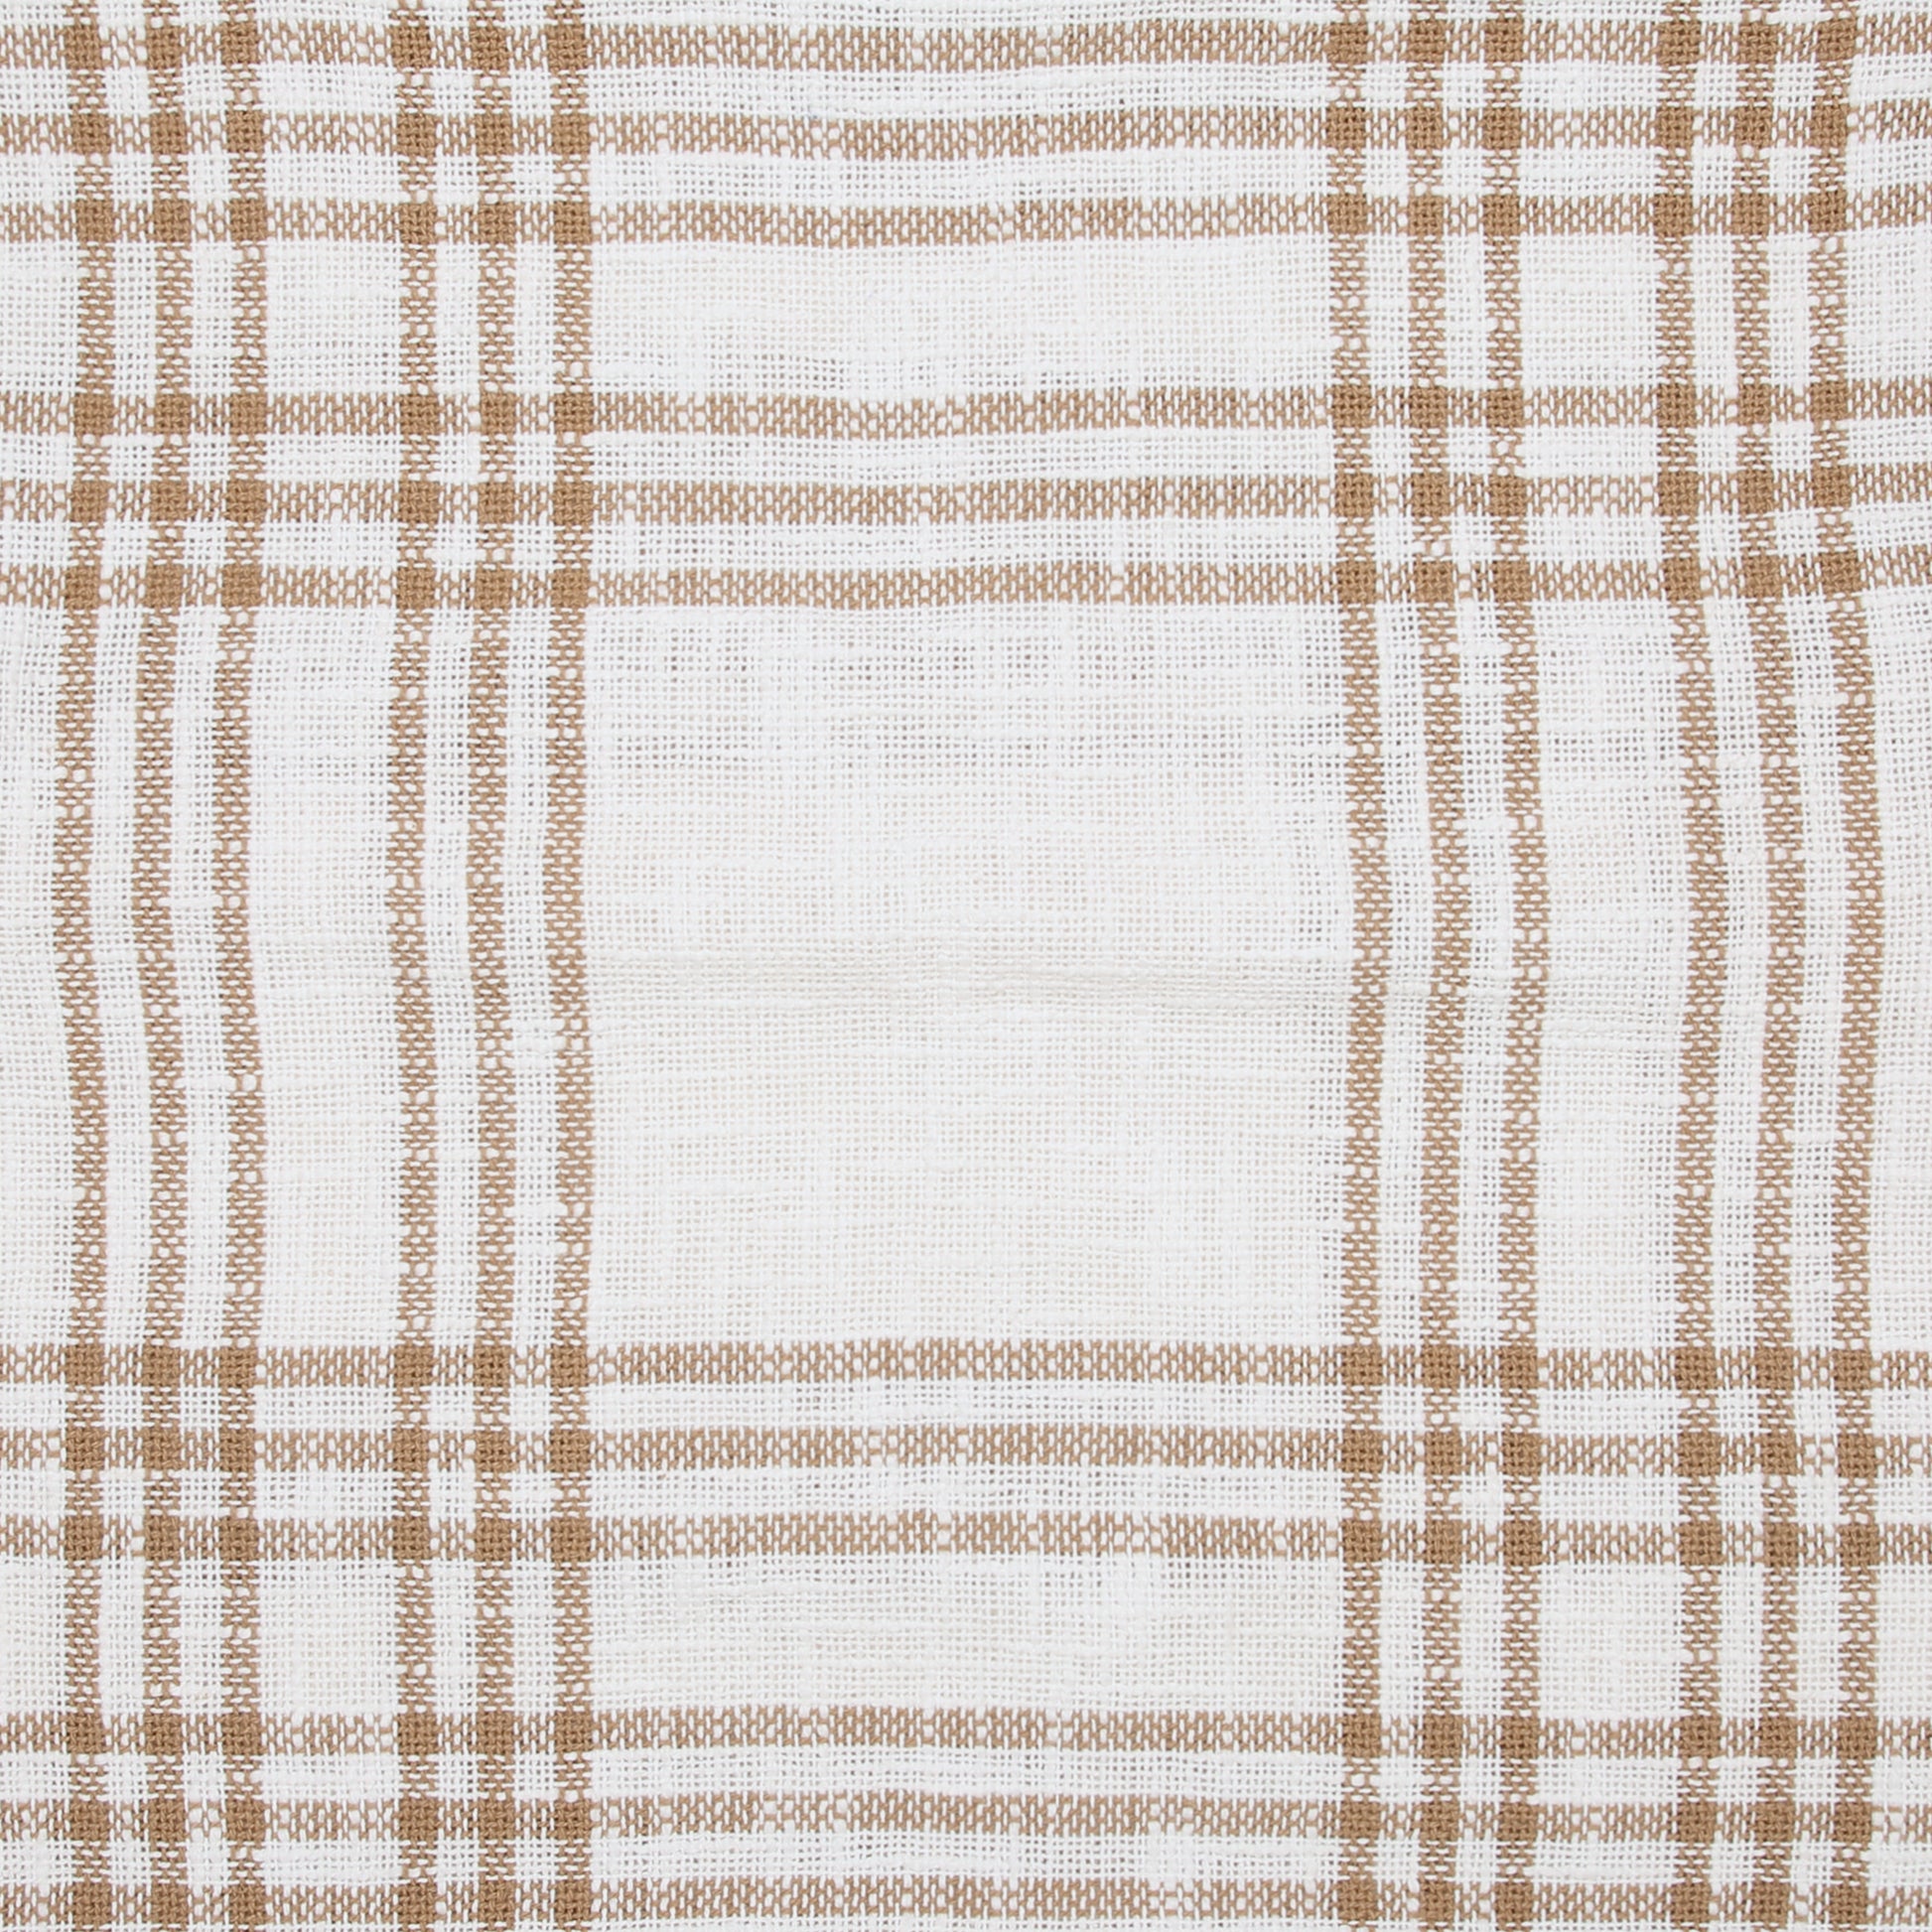 Wheat Plaid Woven Blanket Zoomed In